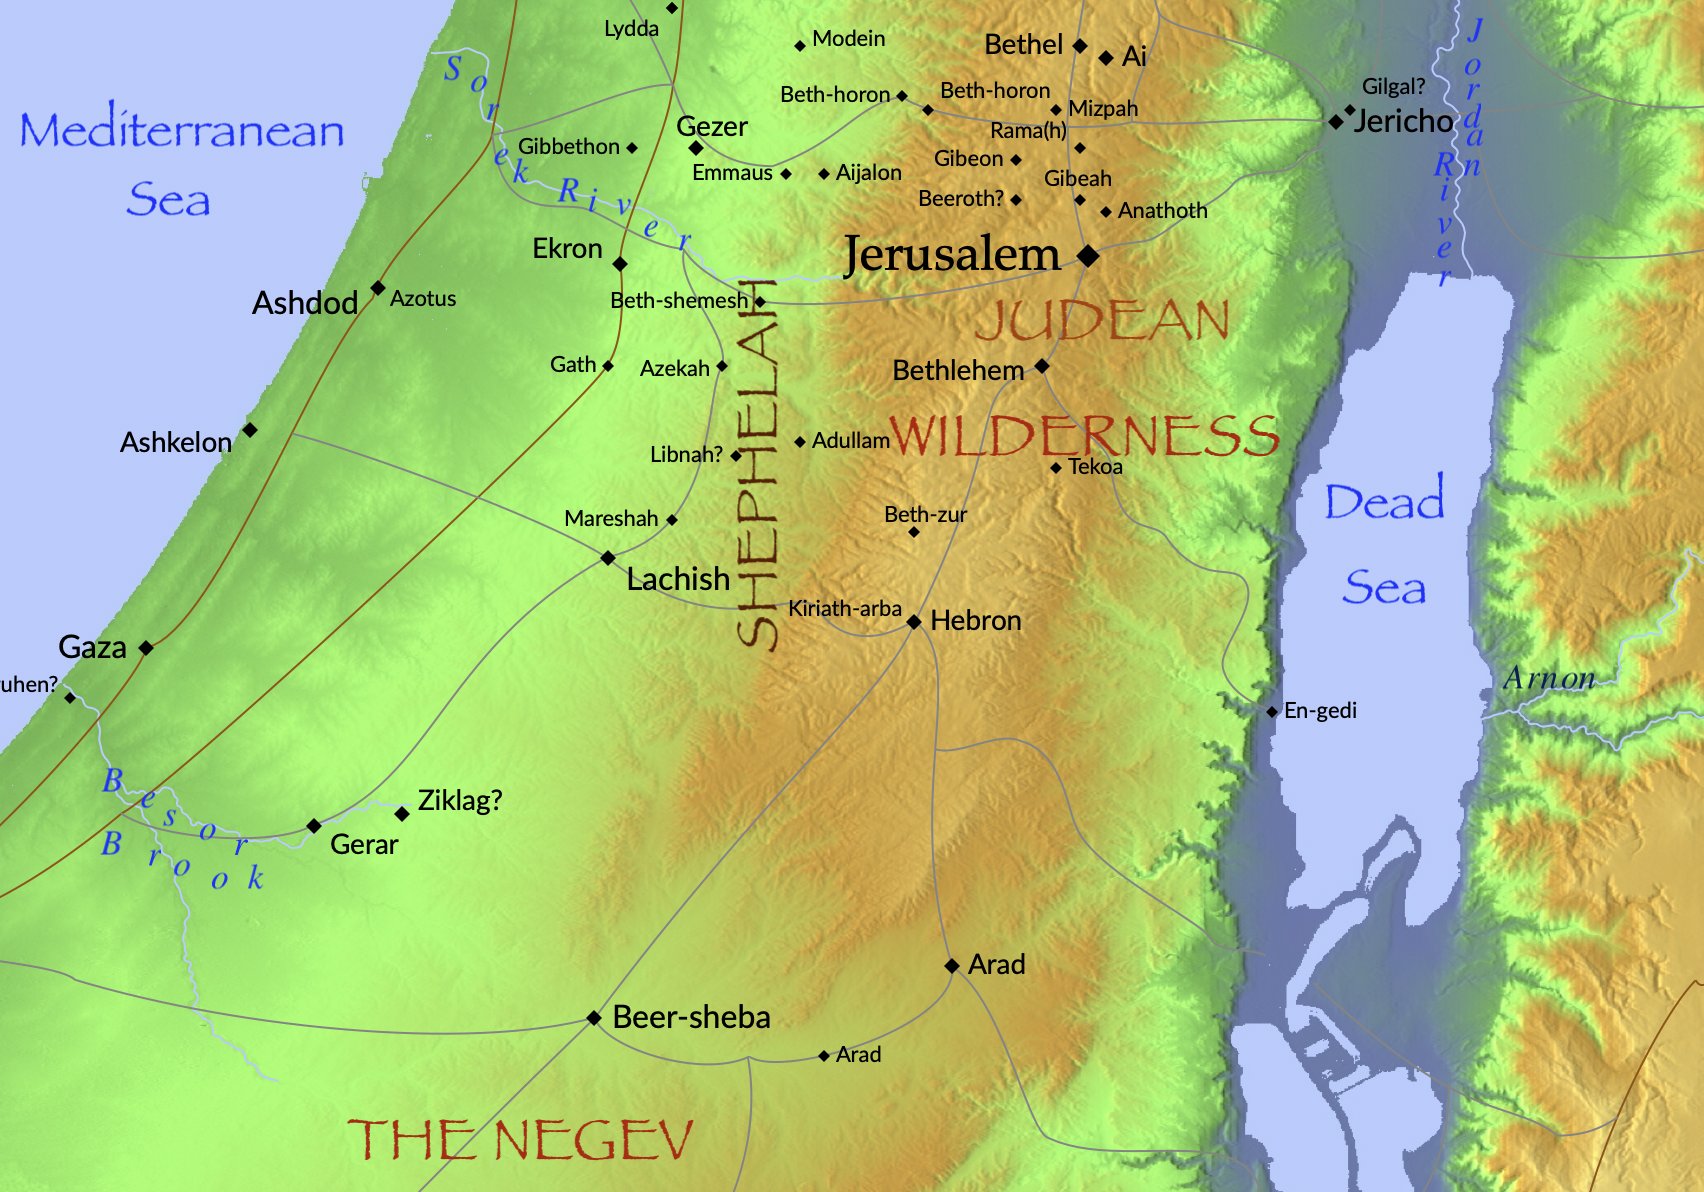 A look at the map of Jerusalem and the surrounding areas. Different maps are presented from different eras of Jerusalem's history.